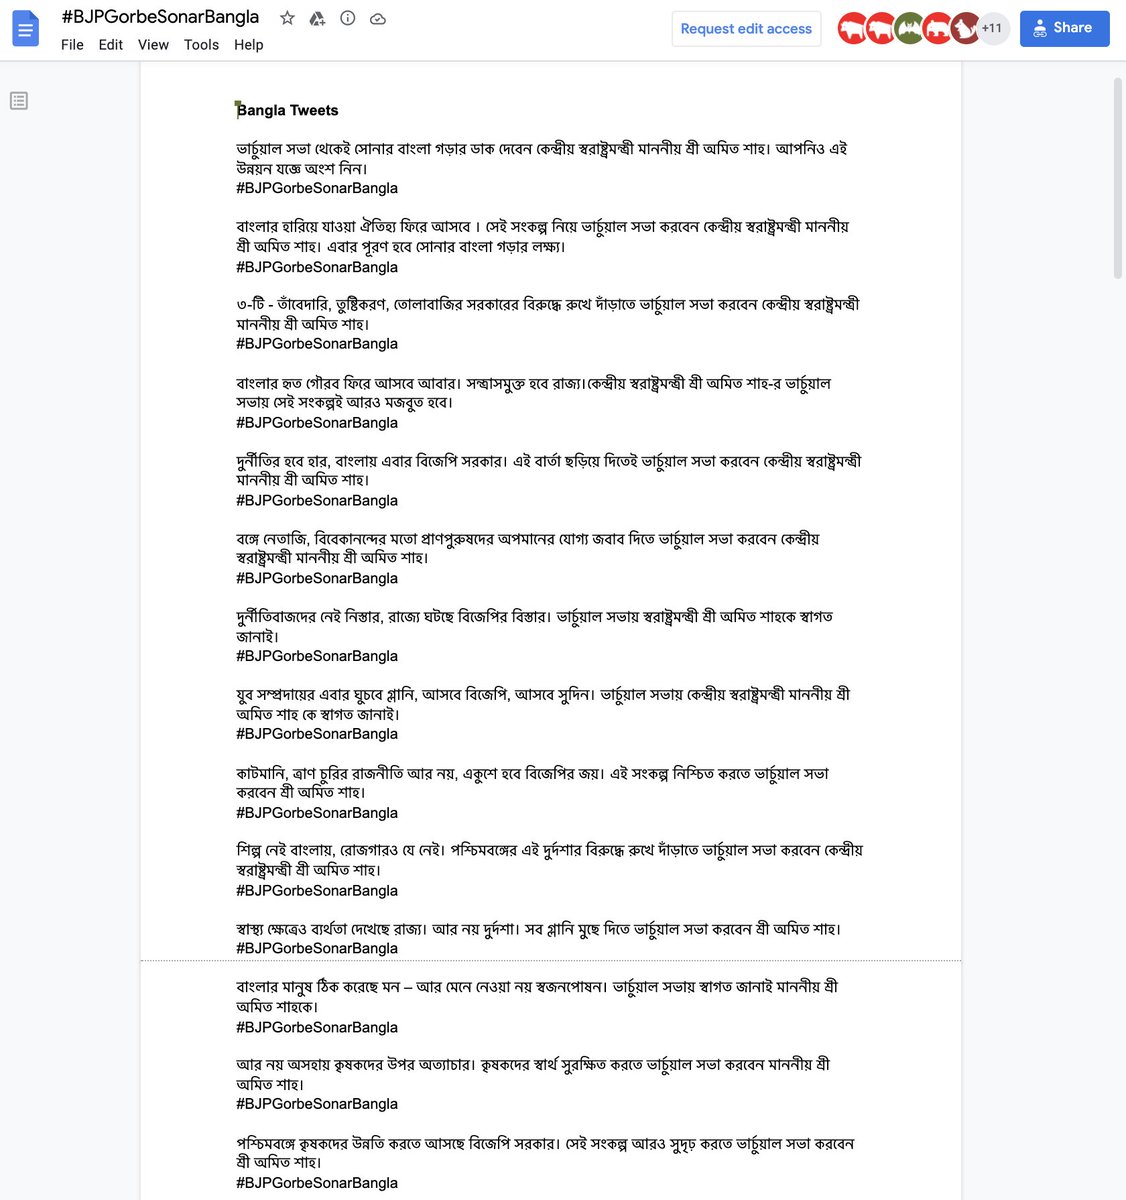 The copy and paste (copypasta) network is getting its text packets from this Google document. The tweets are in English, Hindi and Bangla. Thank you to those who sent this through to me. It's an effective campaign to influence the topic of the coming elections.